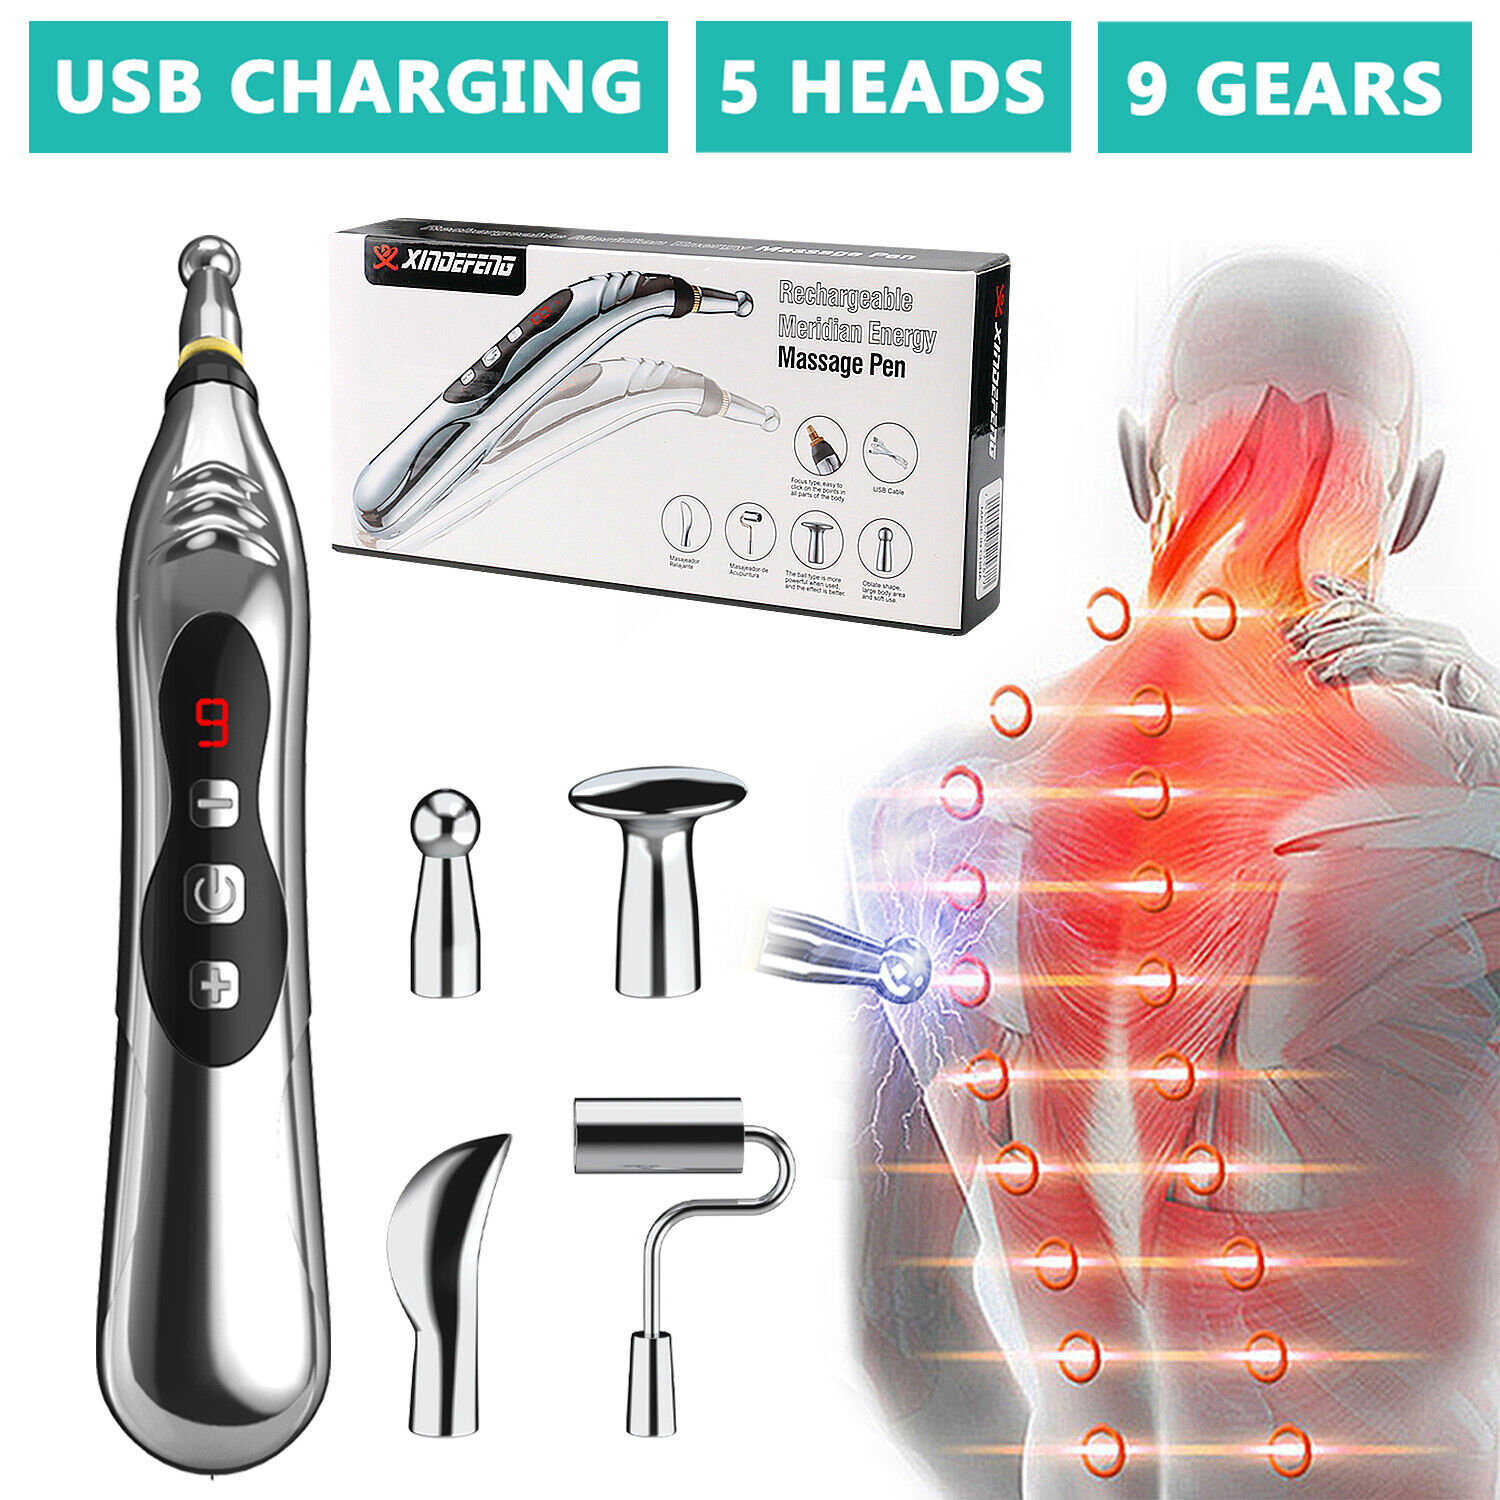 5Heads USB Max 45% OFF Electronic Acupuncture Year-end gift Pen Energy Body Heal Meridian